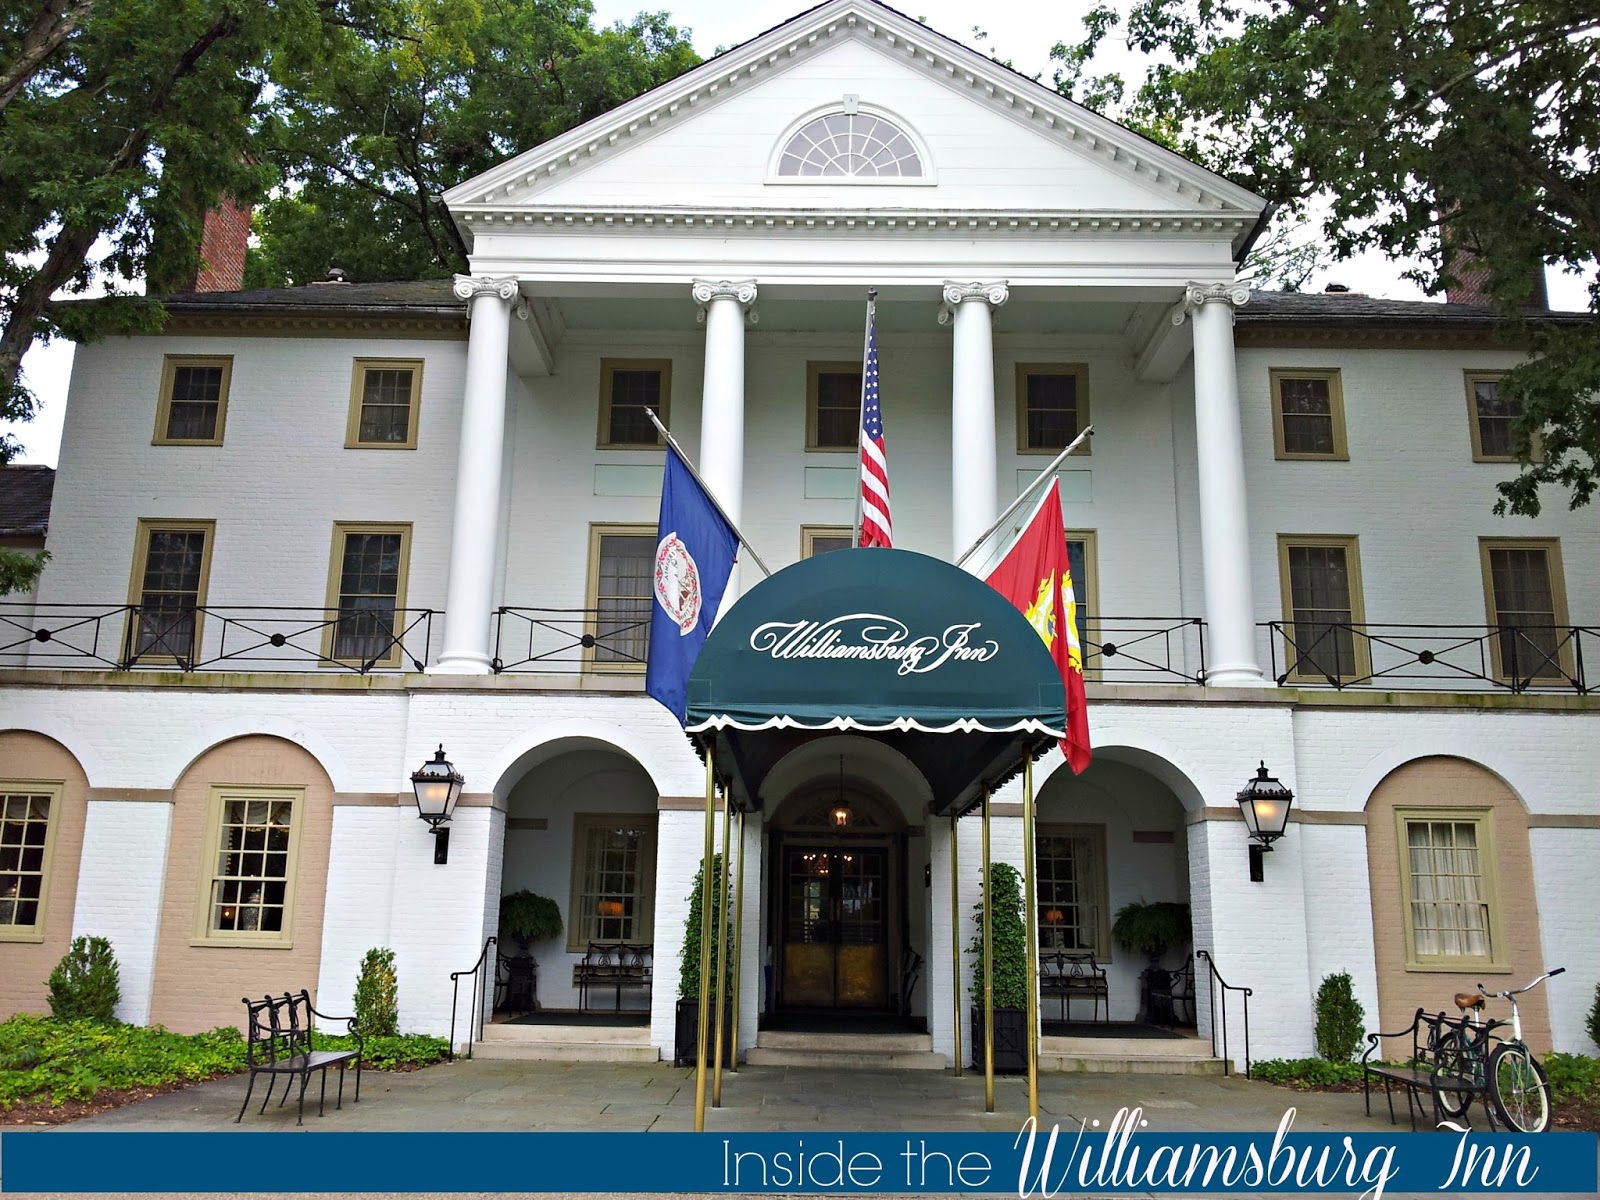 Hines-Sight Blog: An Instagram Look at the Williamsburg Inn in Colonial